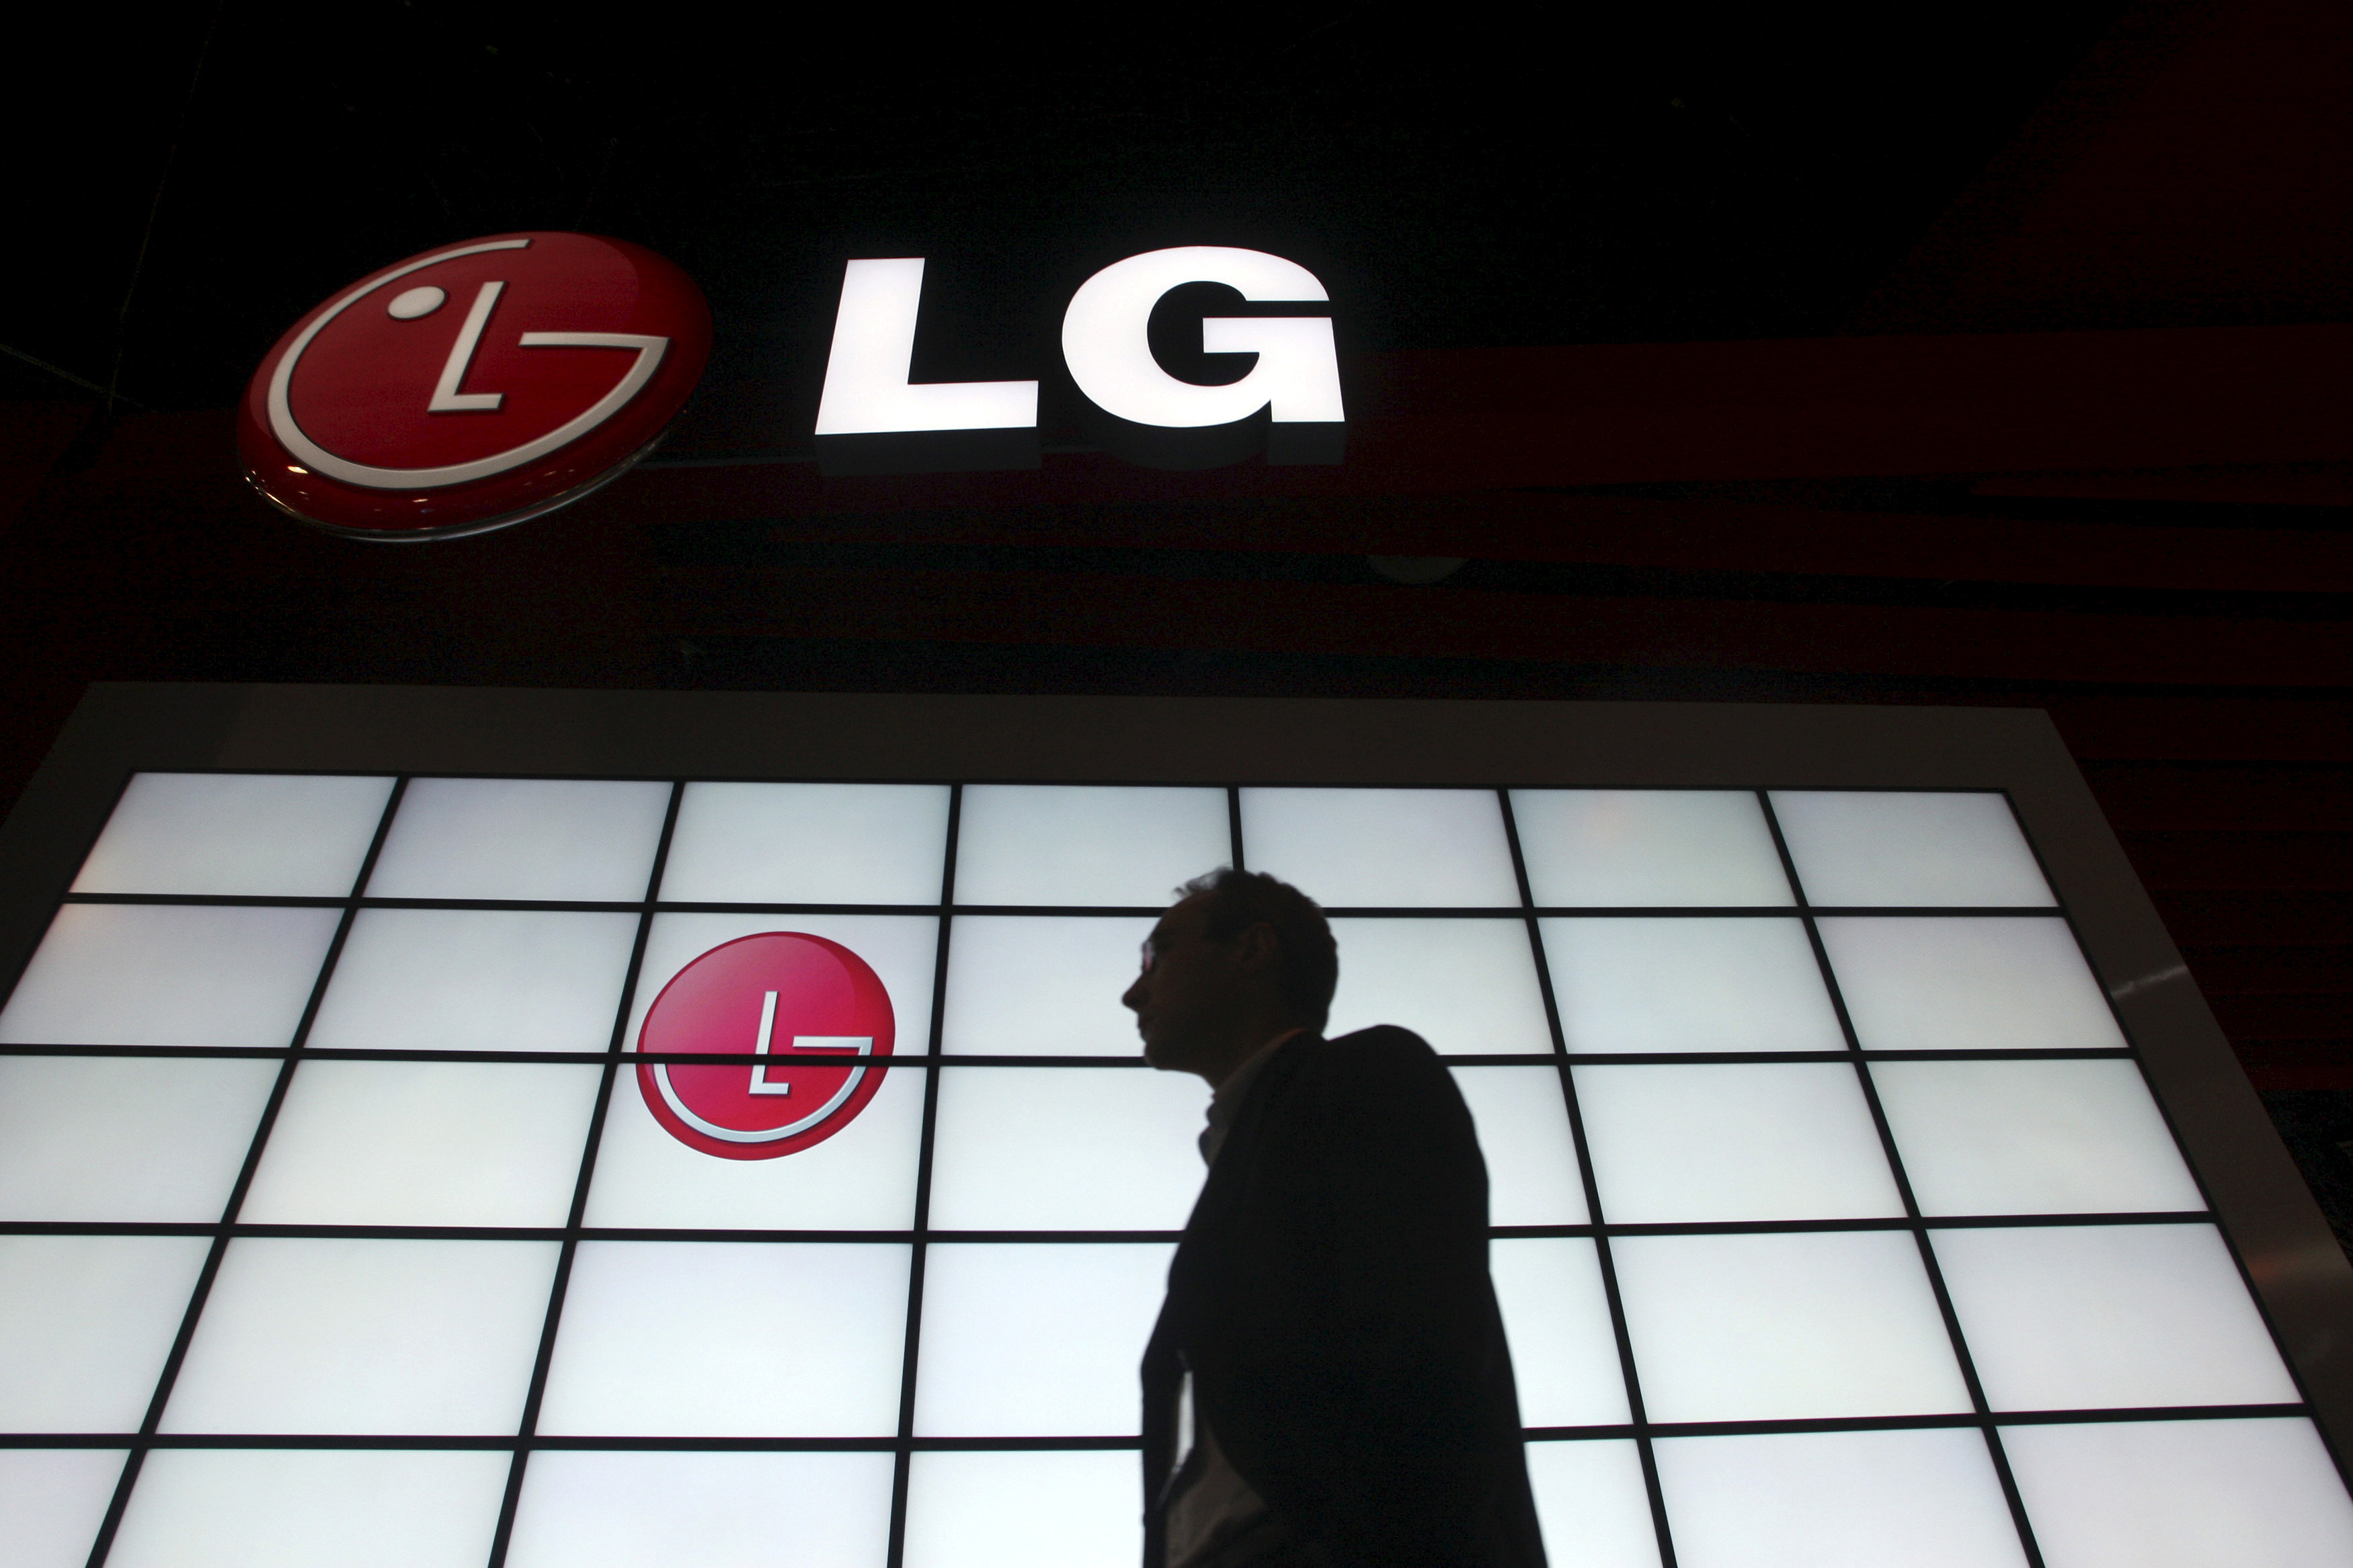 LG quarter-three profit likely rose 44 per cent year-on-year